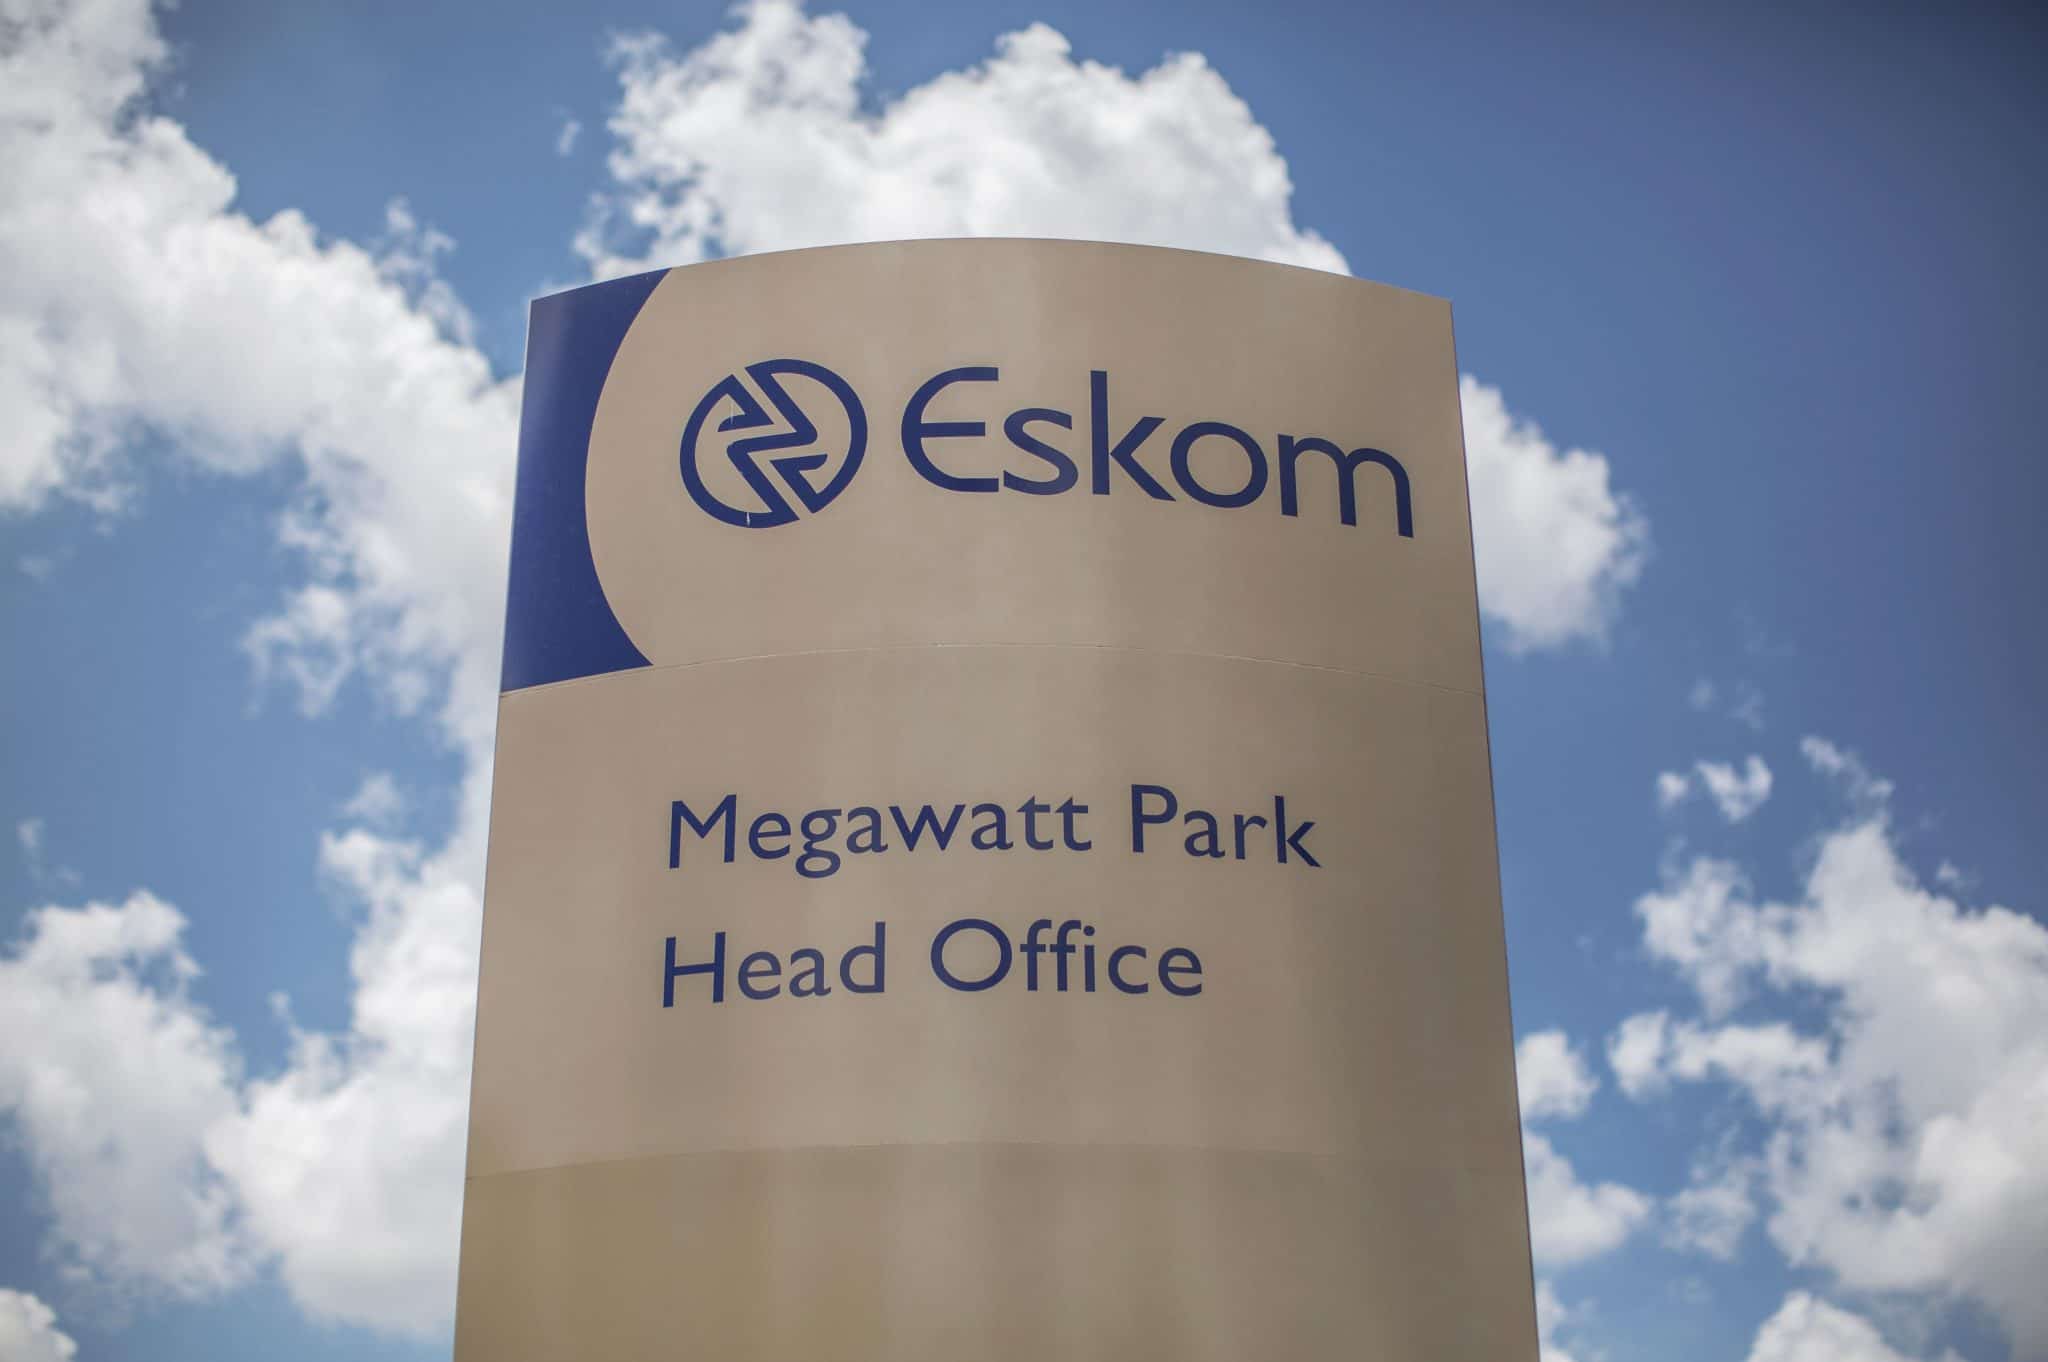 Eskom says maintenance work could worsen power cuts for a year - CNBC Africa